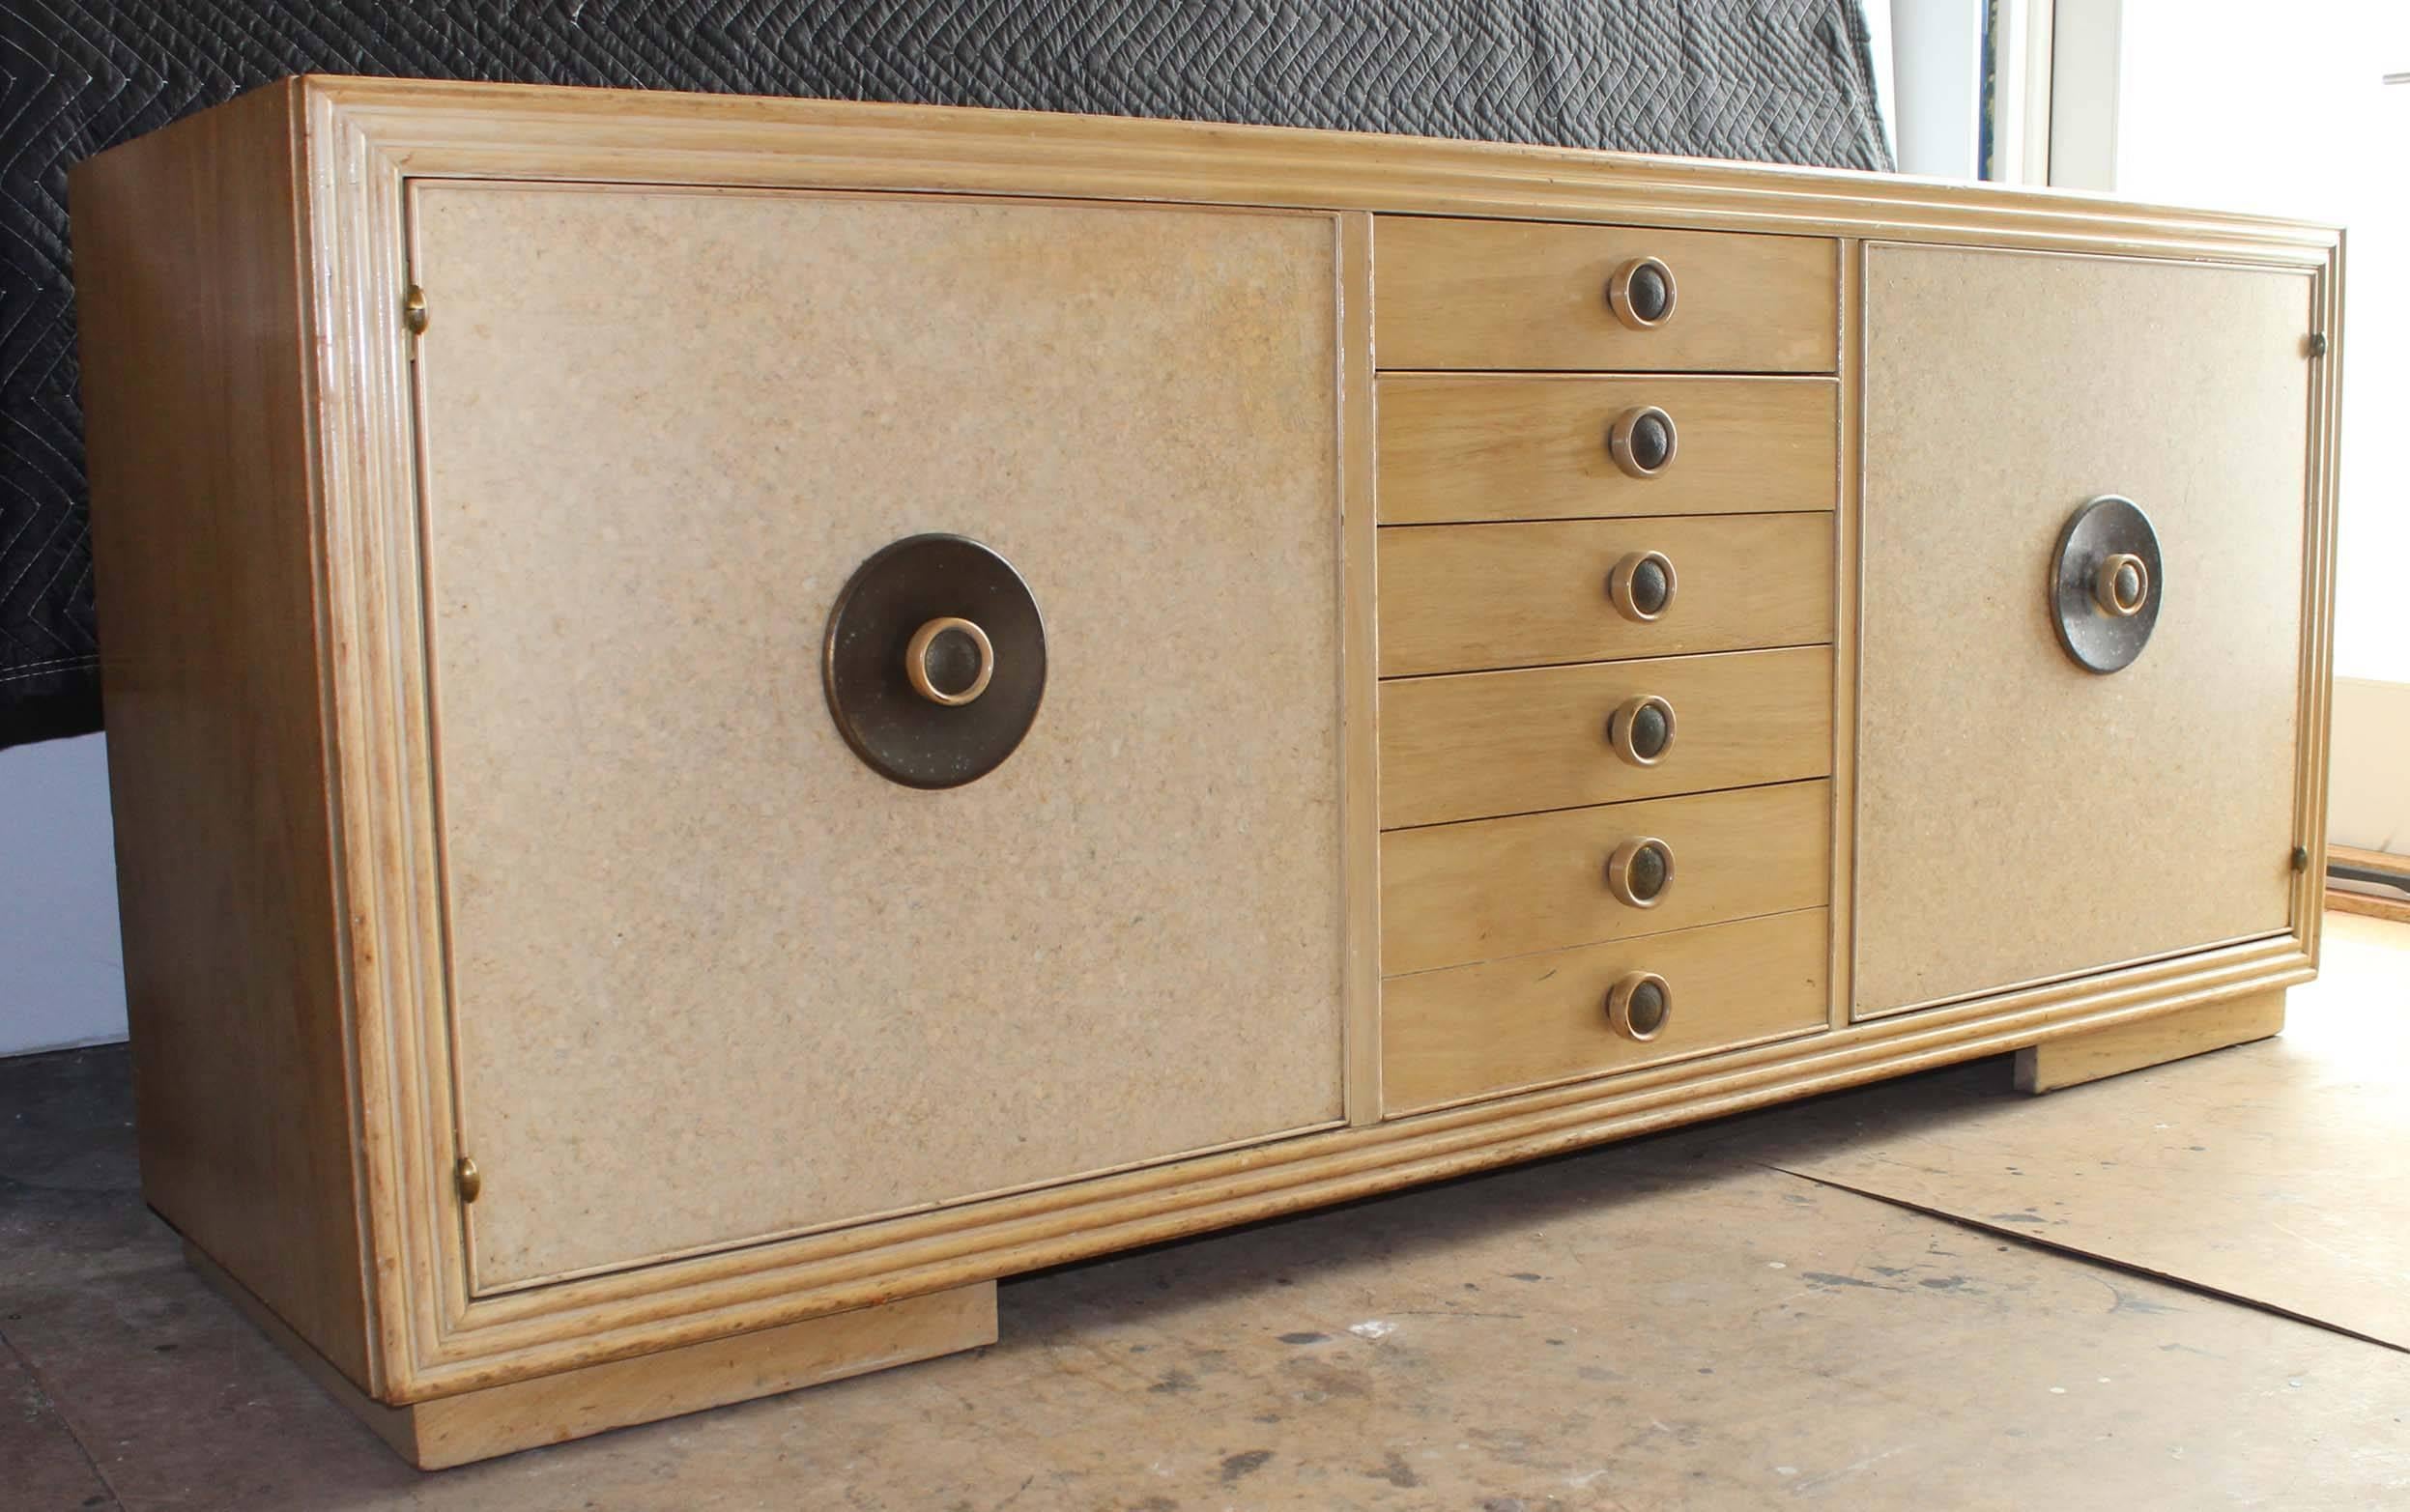 A maple wood sideboard with signature cork front cabinets and patinaed brass hardware.